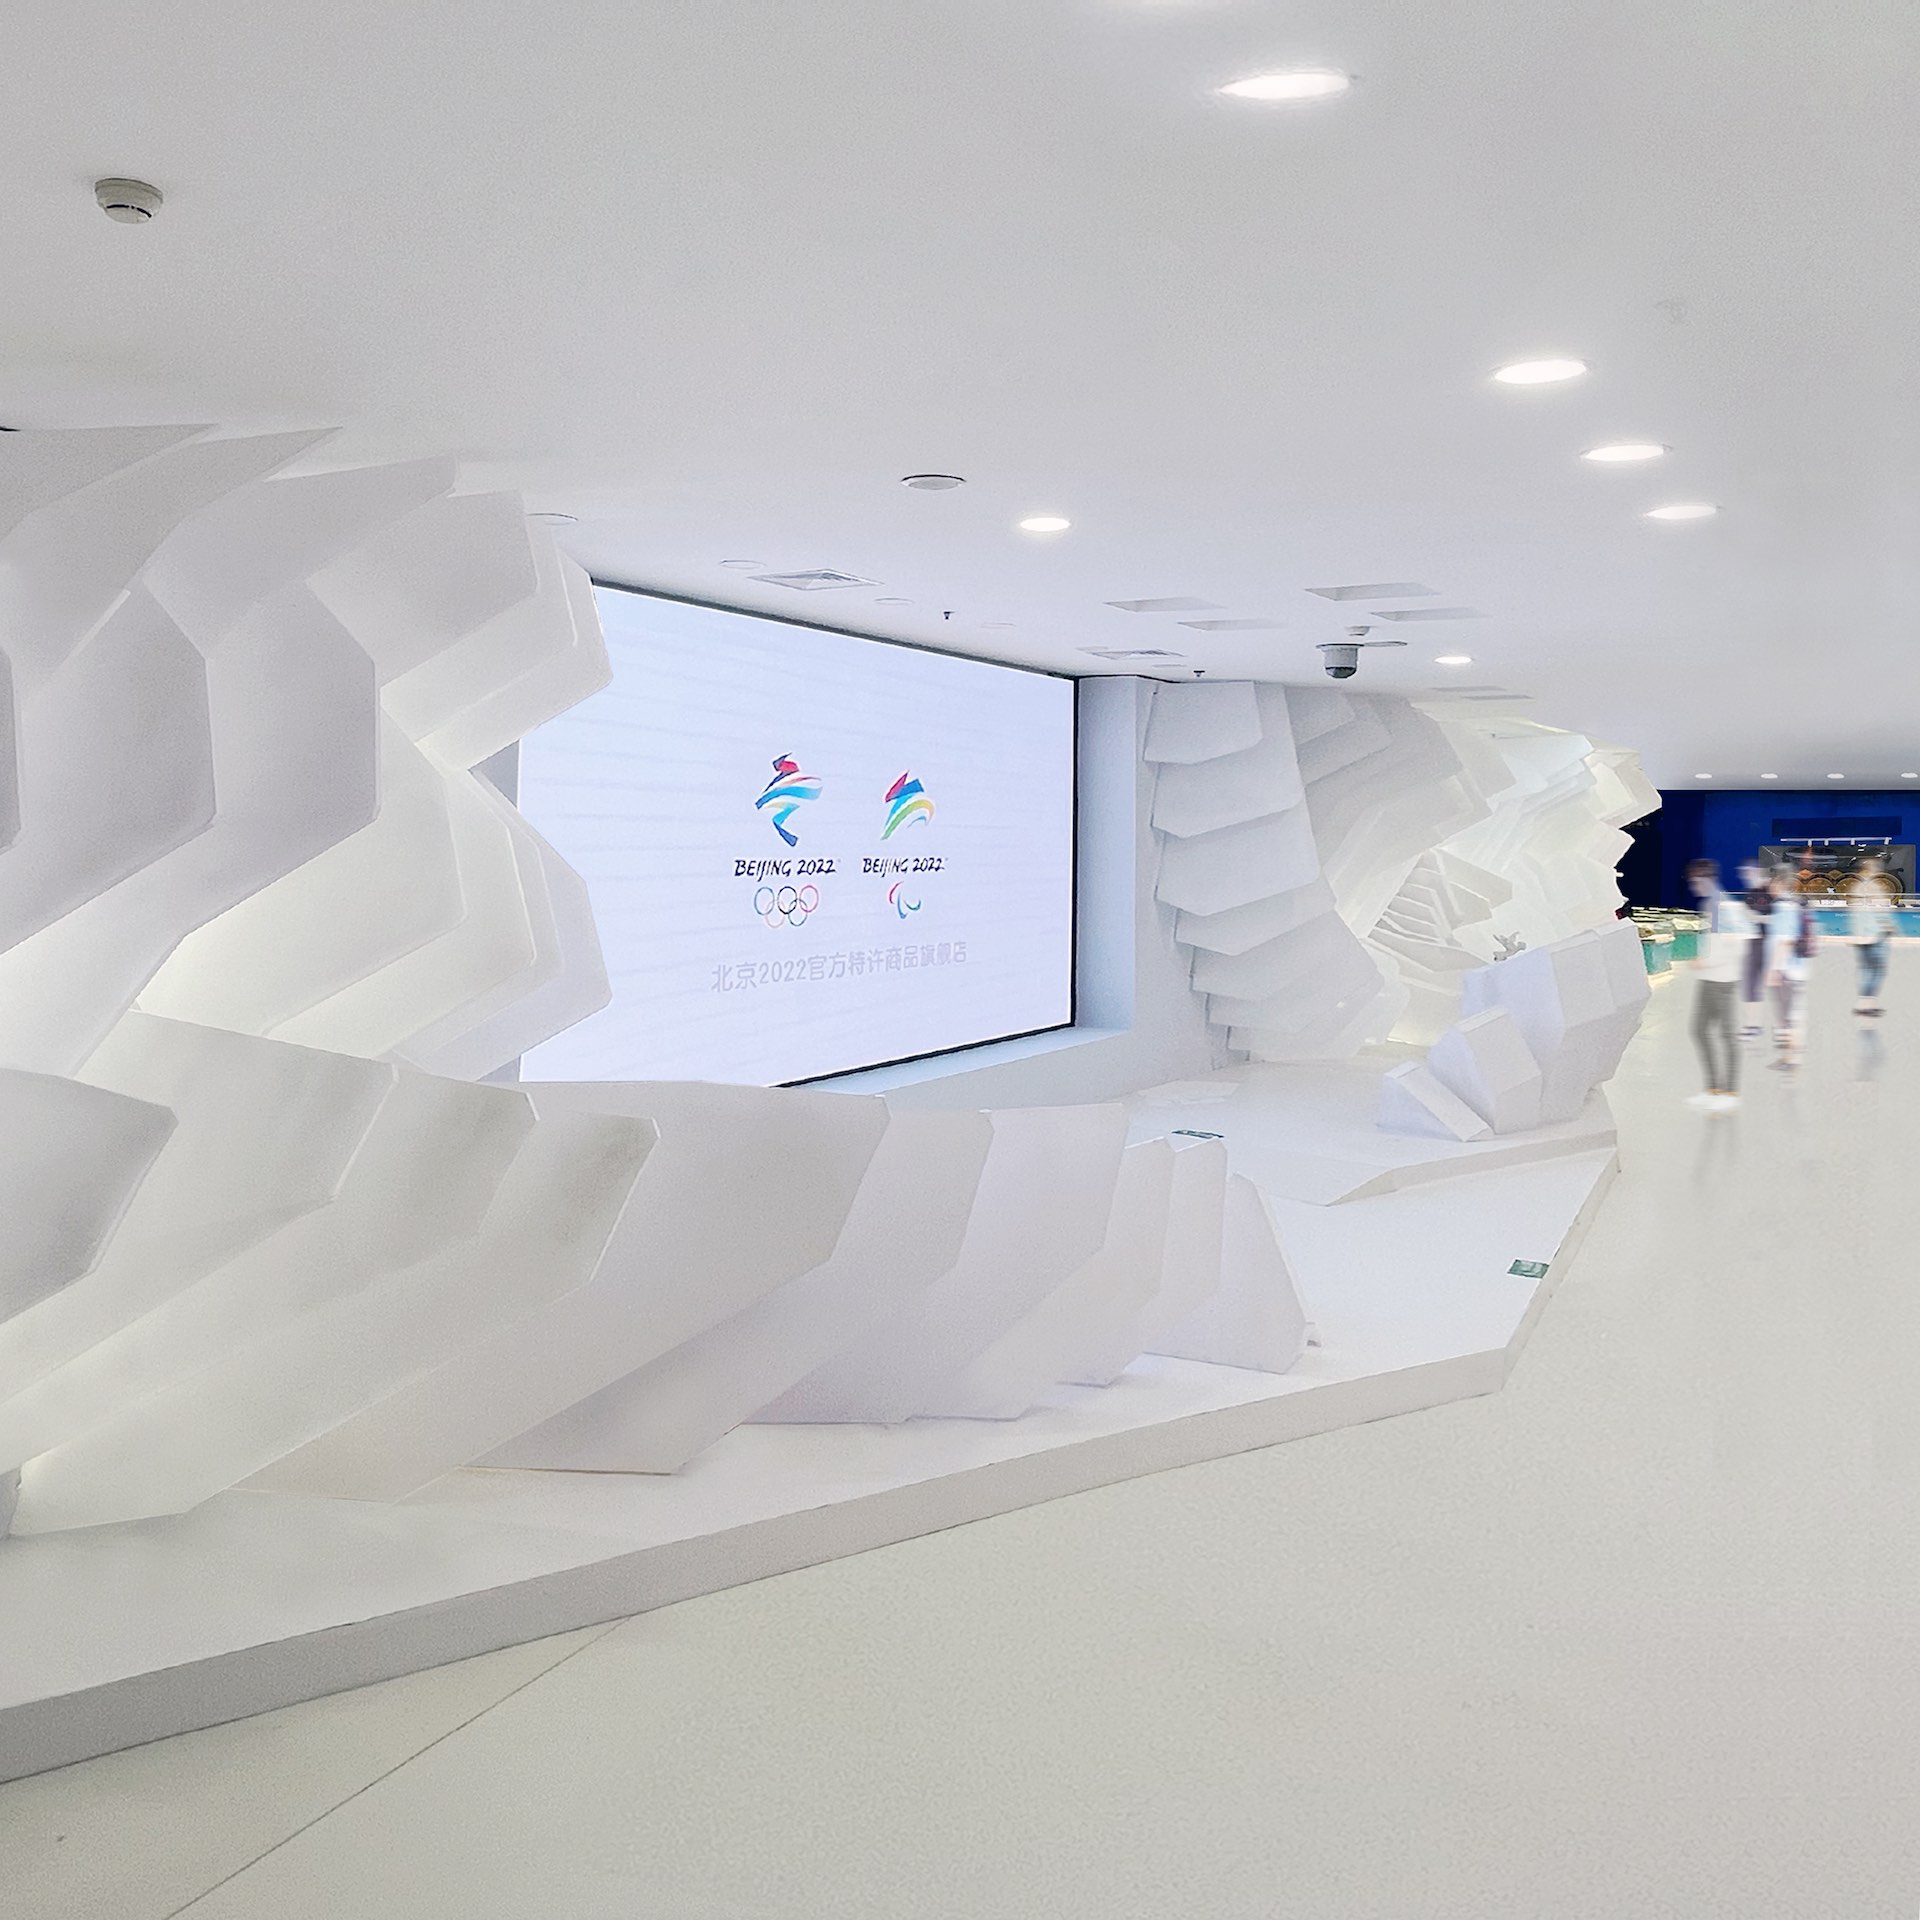 MUSE Design Winners - Flagship Store Design for Beijing 2022 Winter Olympics